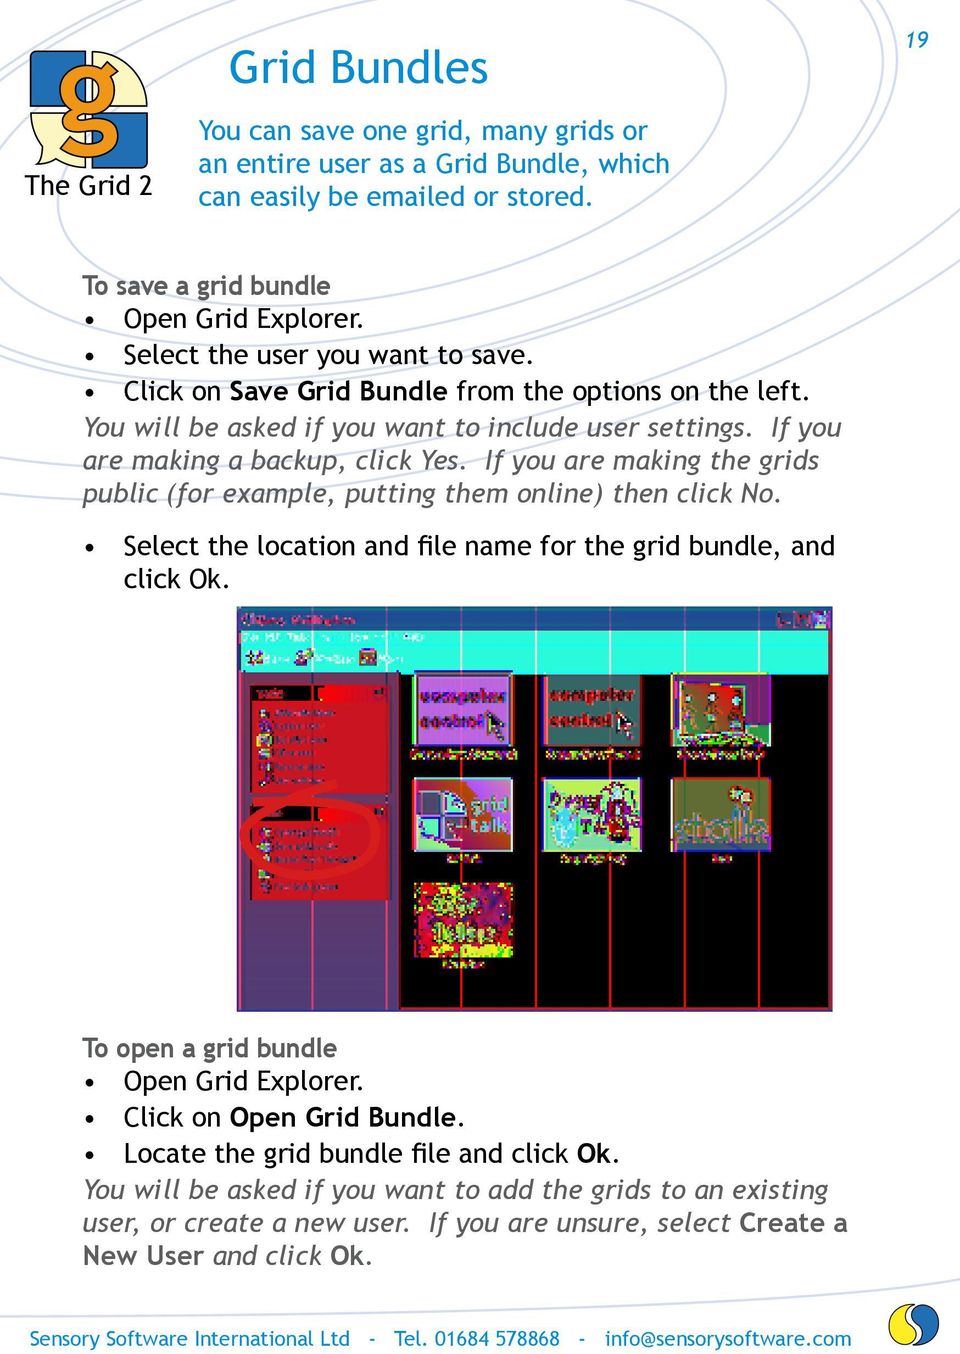 If you are making the grids public (for example, putting them online) then click No. Select the location and file name for the grid bundle, and click Ok.